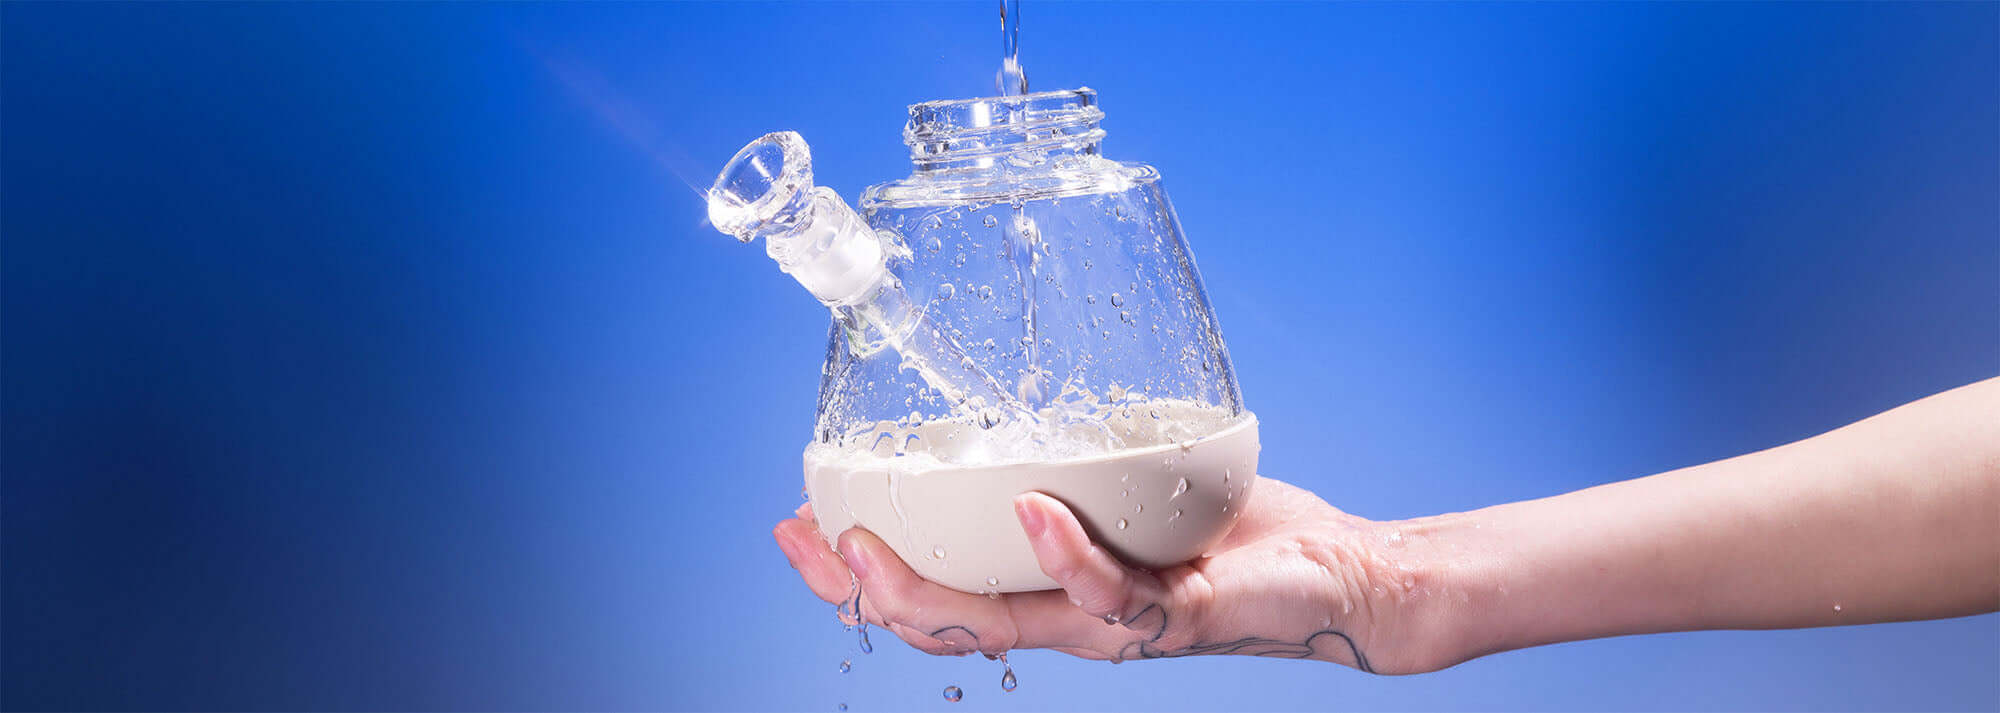 Hand holding the base of a Weeday detachable bong, showing its easy-to-clean design by rinsing under running water against a blue backdrop.